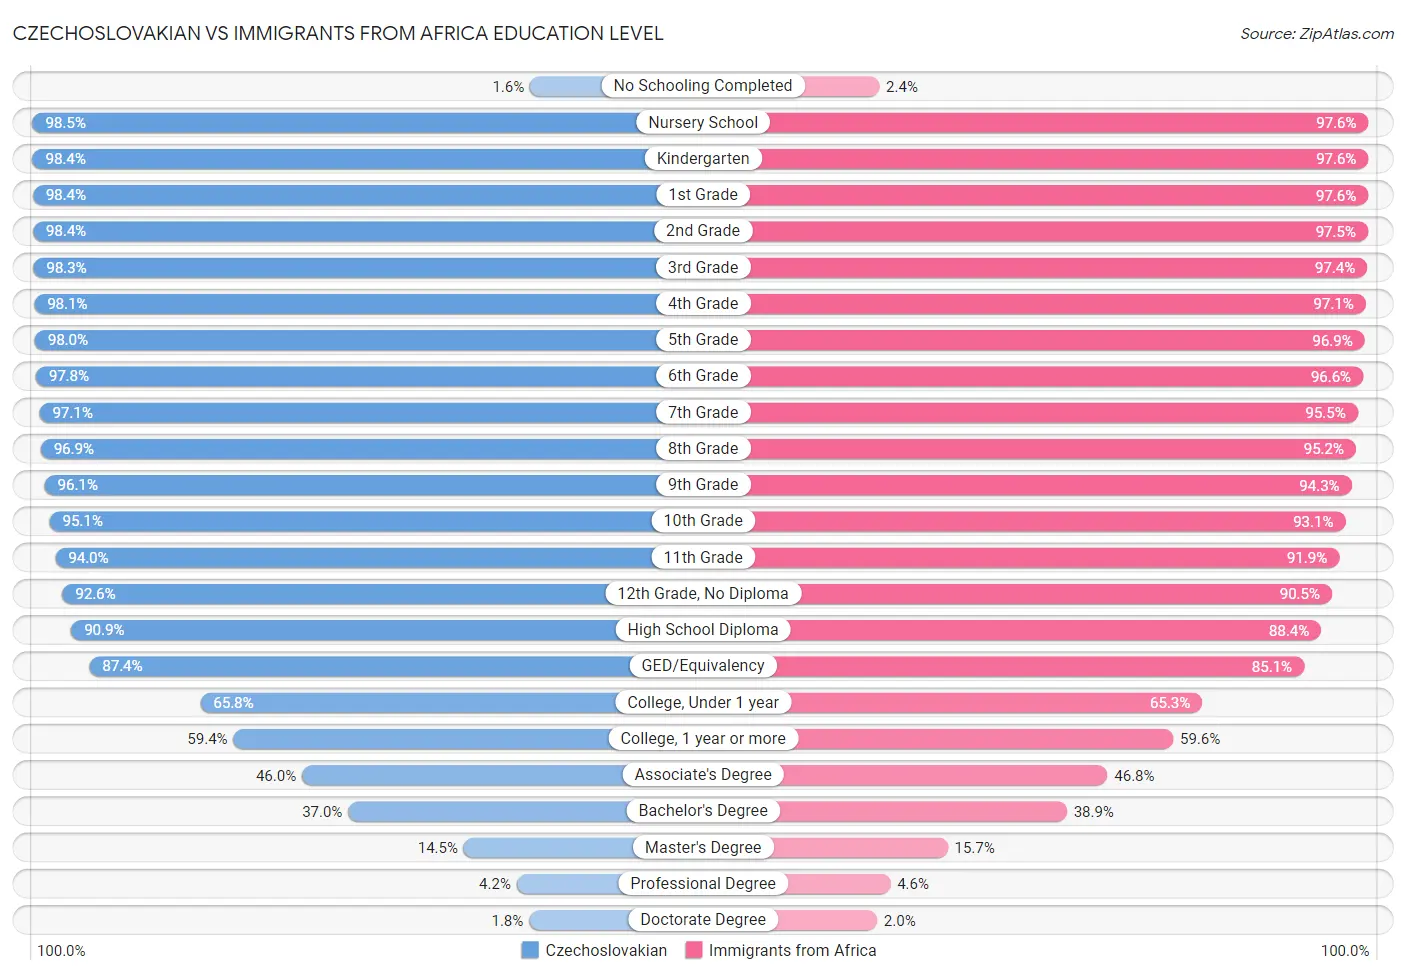 Czechoslovakian vs Immigrants from Africa Education Level